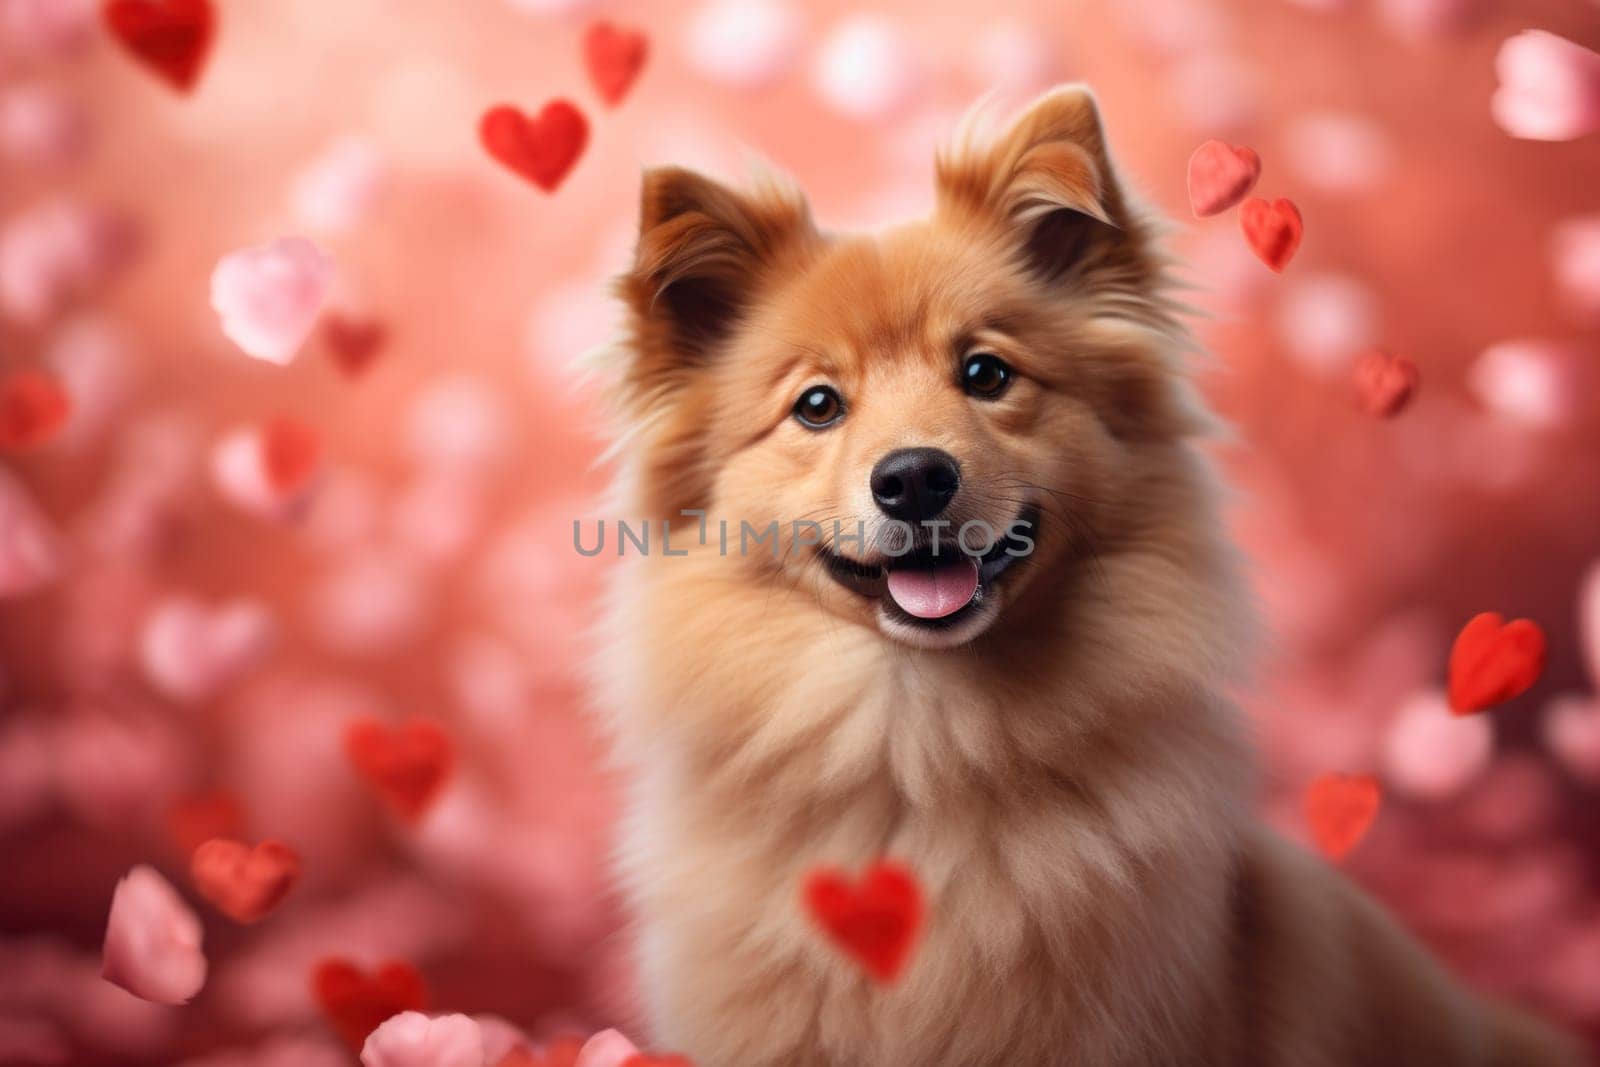 A dog is surrounded by hearts in a pink background